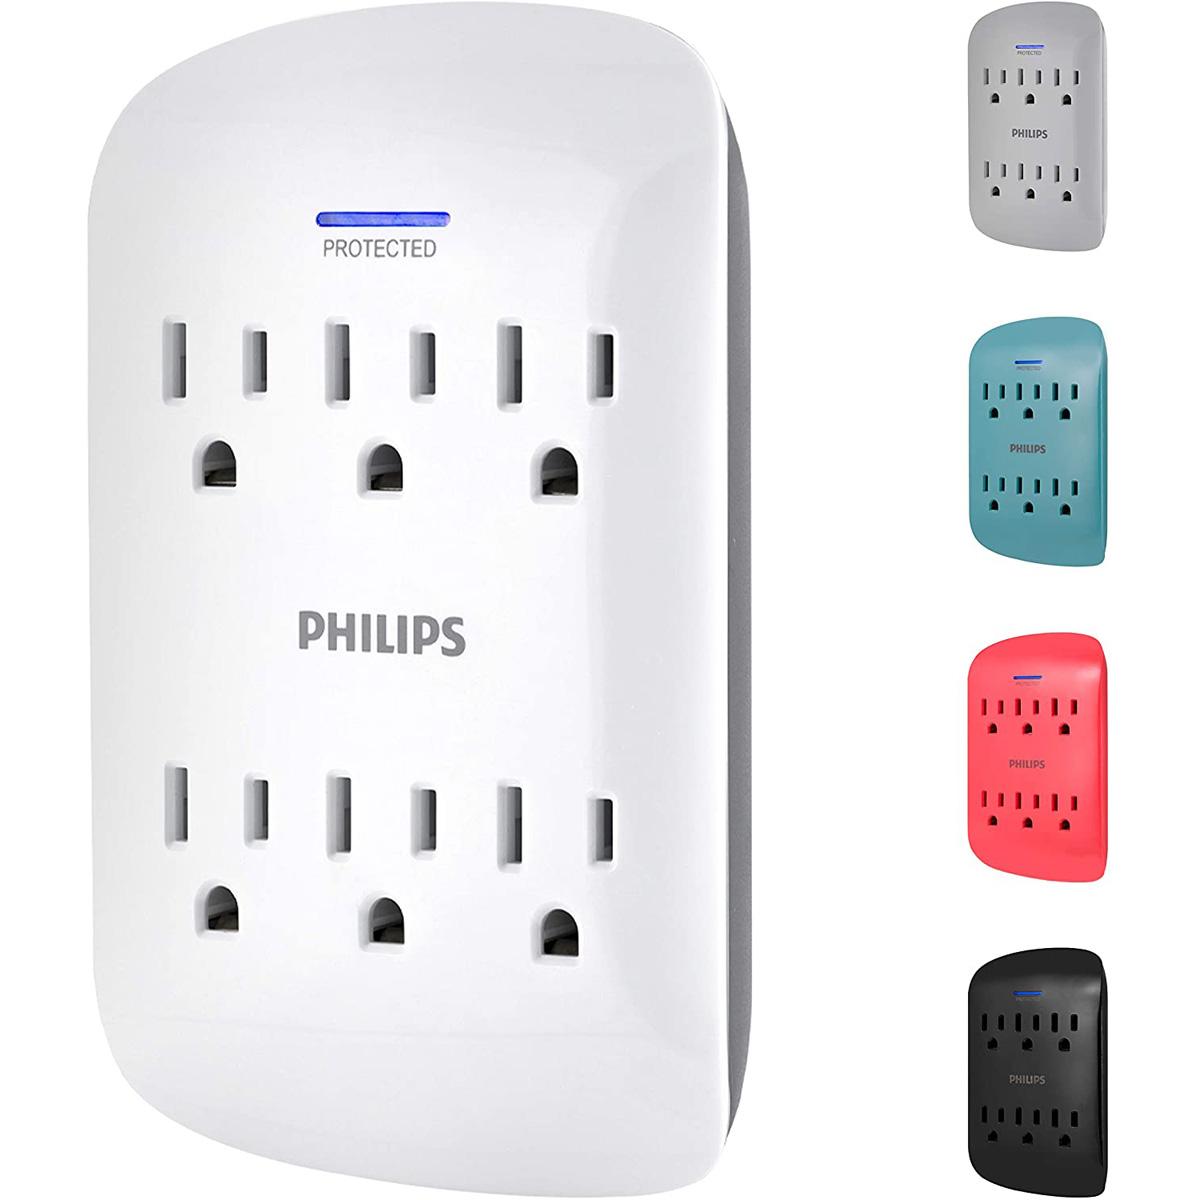 Philips 6-Outlet Extender Surge Protector for $7.48